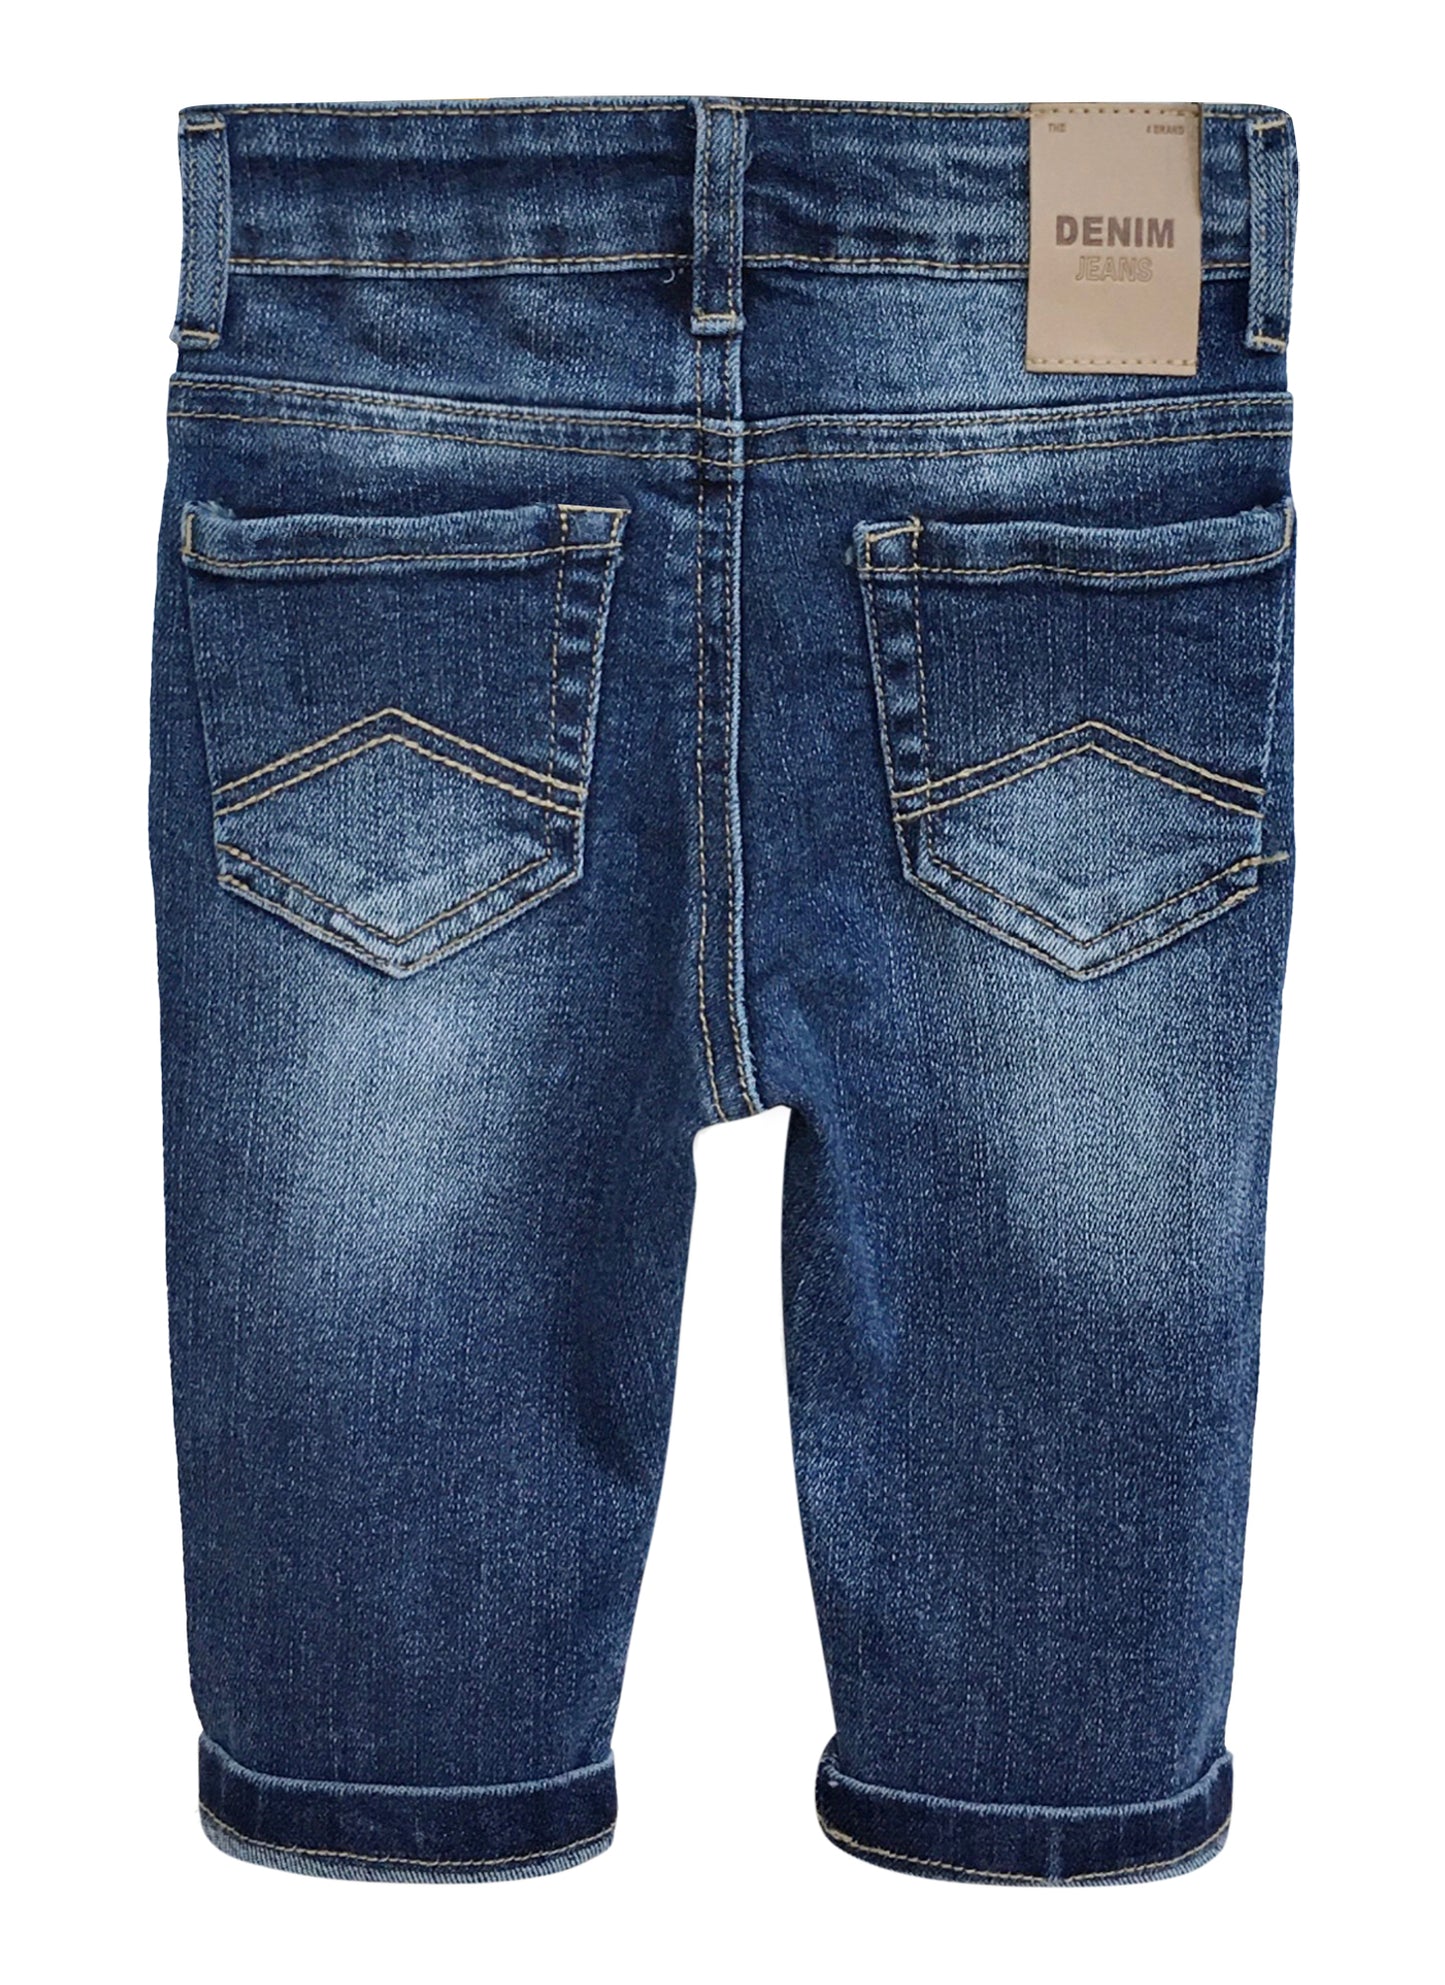 Infant Jeans,Baby Toddler Elastic Band Inside with D-ring4 Ripped Holes Distressed Soft Denim Pants